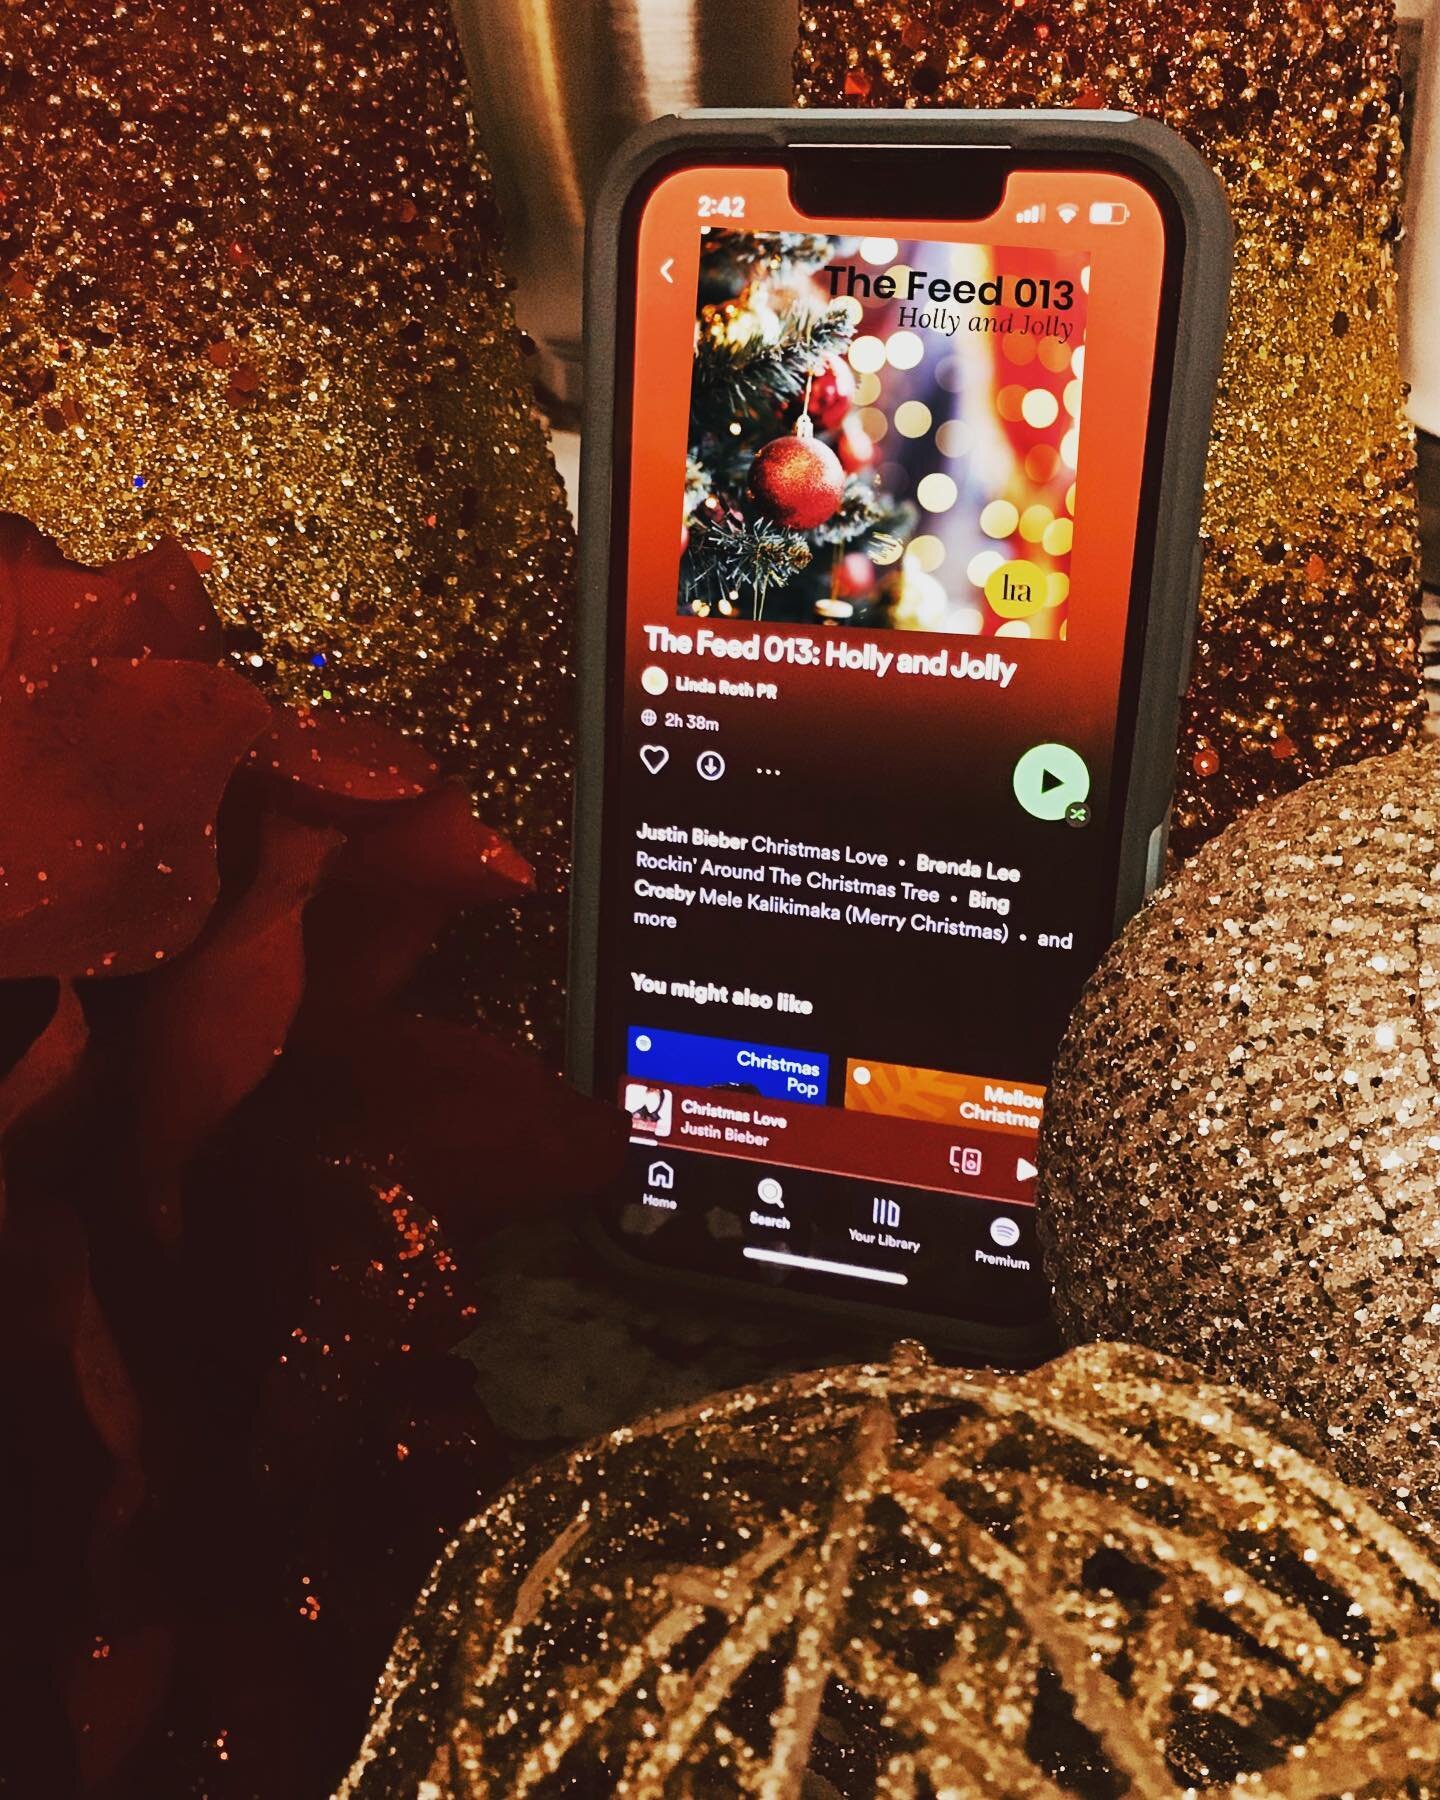 &lsquo;tis the season for a new #LRA playlist.. this time holiday edition!!🎄🎁🧣❄️ 

Visit the link in our bio to check out &ldquo;The Feed 013: Holly and Jolly&rdquo;. 🎧 Let us know your fave holiday tunes in the comments and we&rsquo;ll add them 